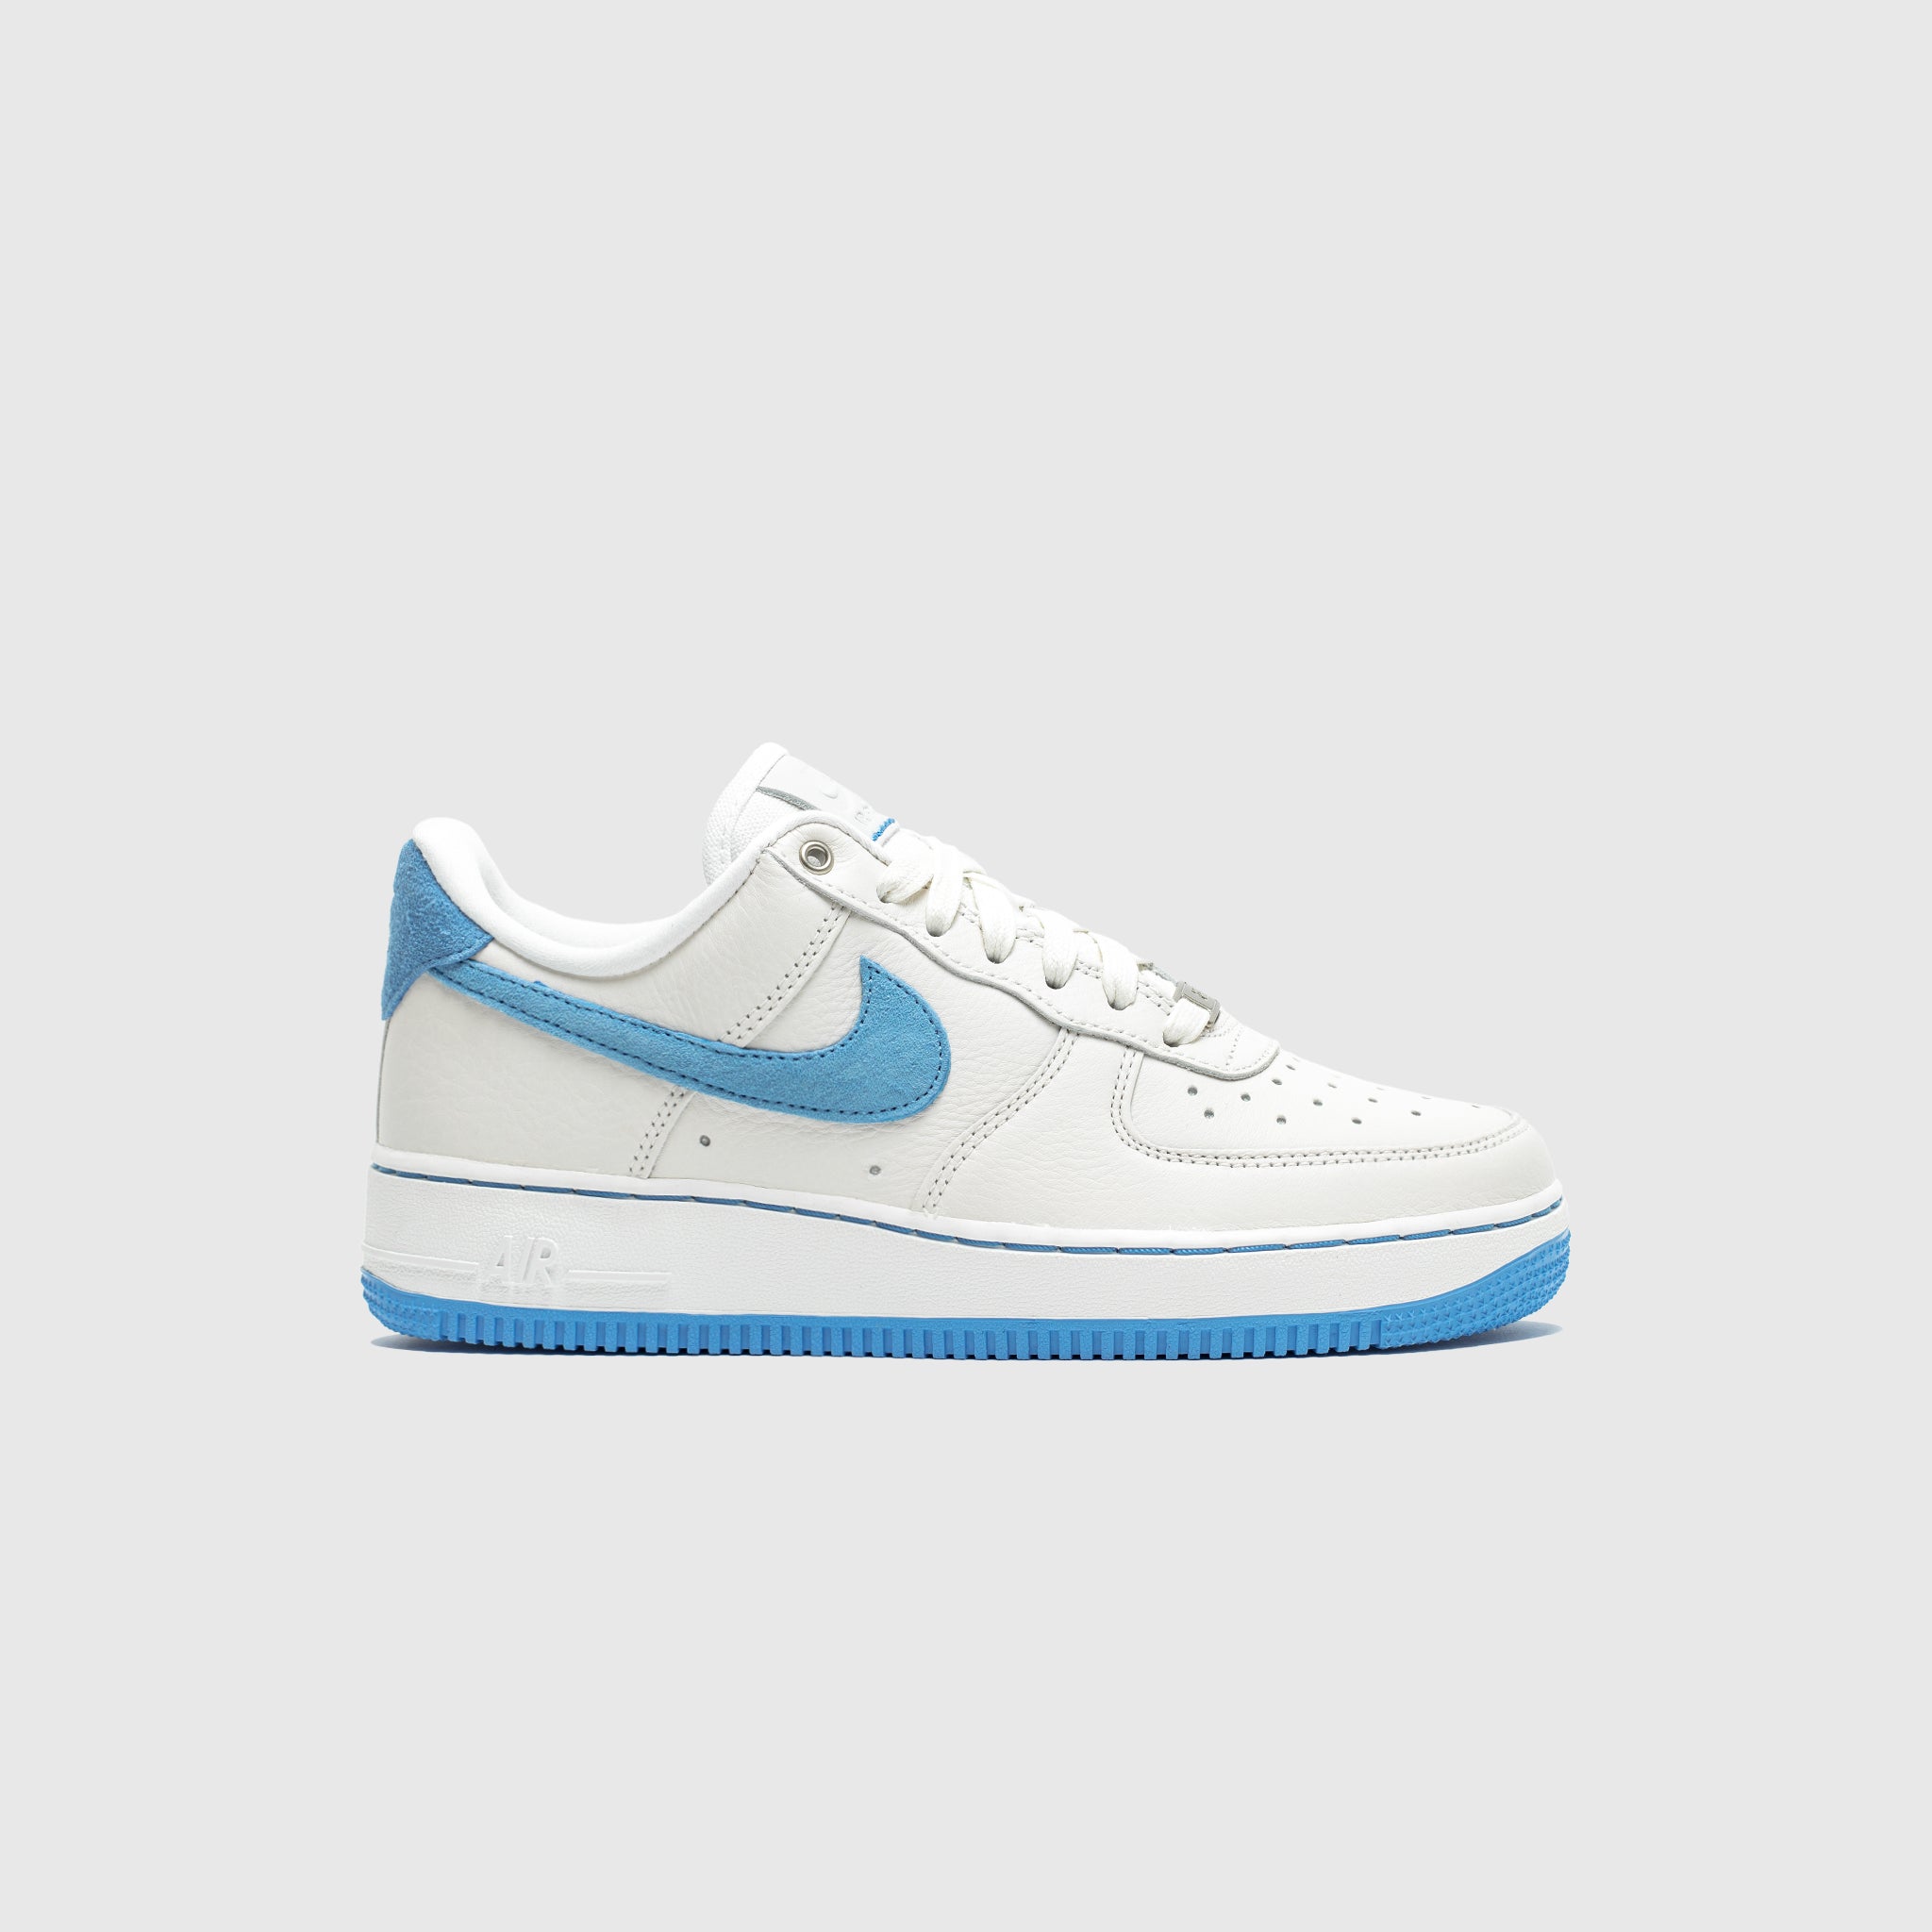 Women's Air Force 1 'University Blue' (DX1193-100) Release Date. Nike SNKRS